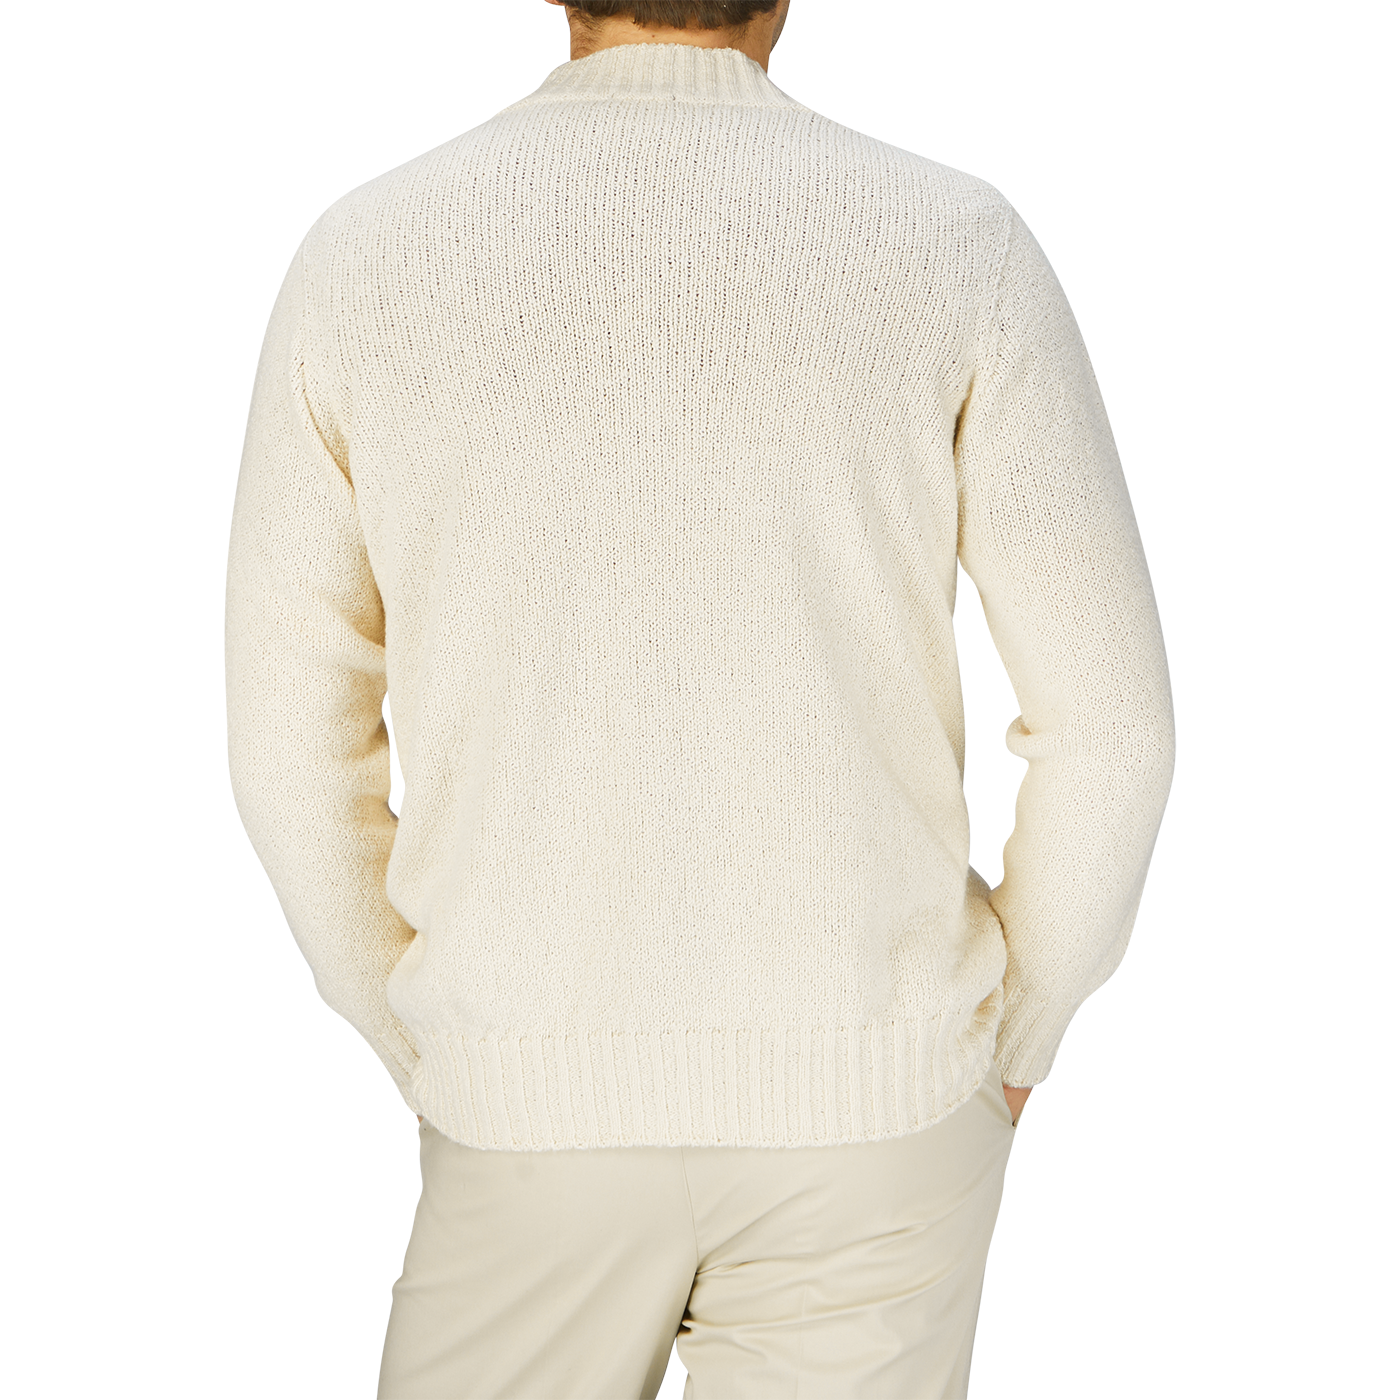 The man is seen from behind, dressed in a Drumohr ecru white knitted cotton cardigan.